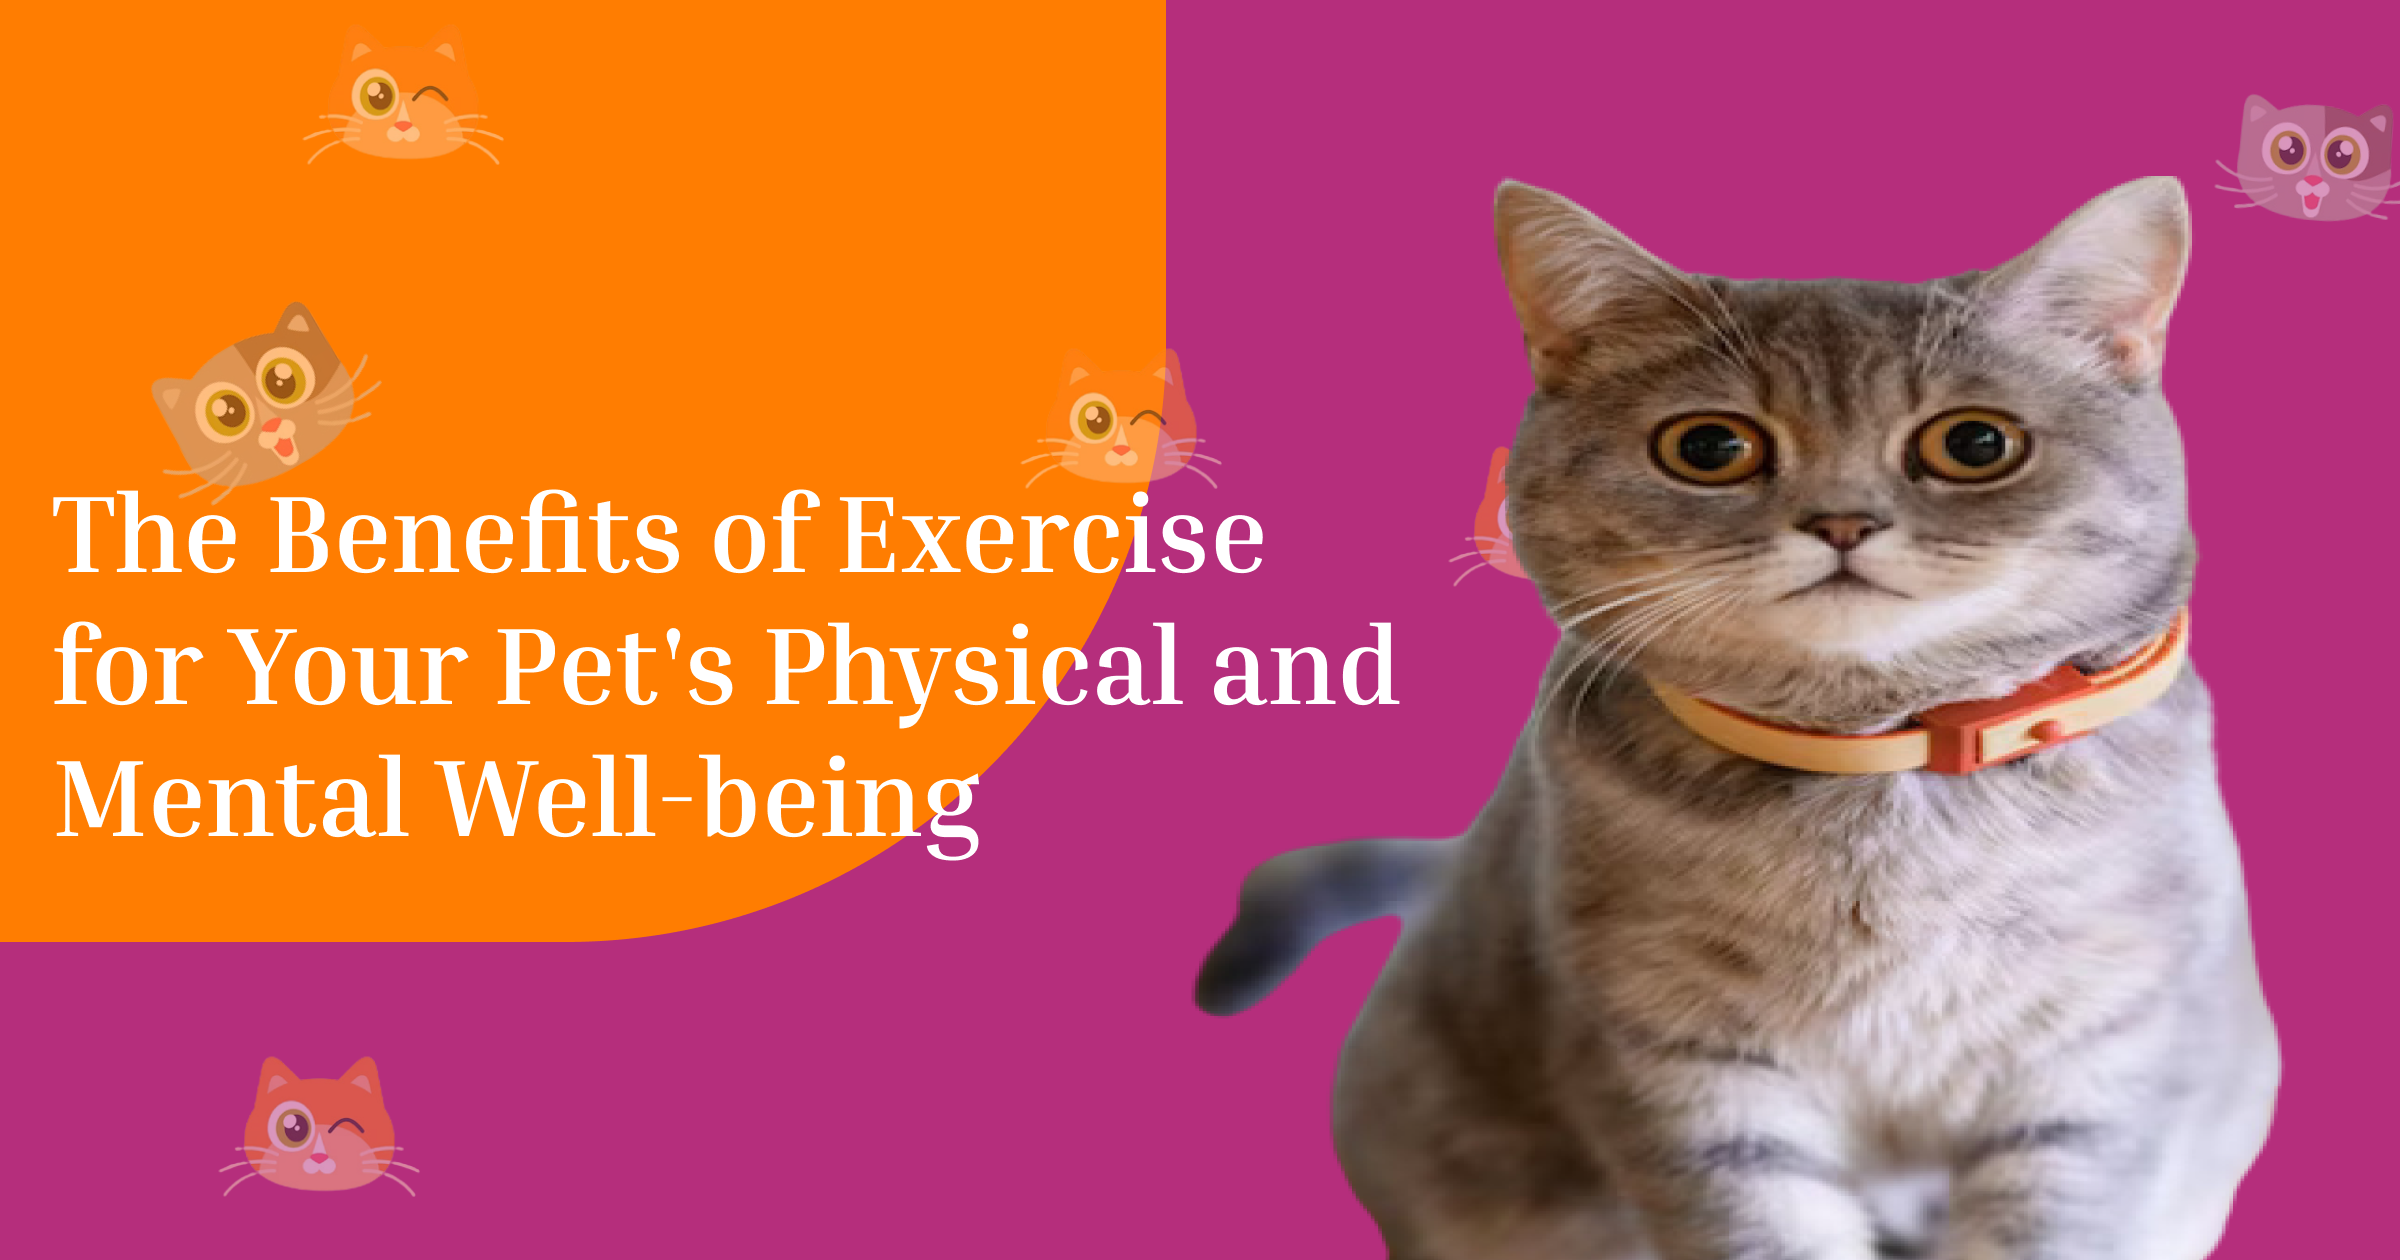 The Benefits of Exercise for Your Pet's Physical and Mental Well-being